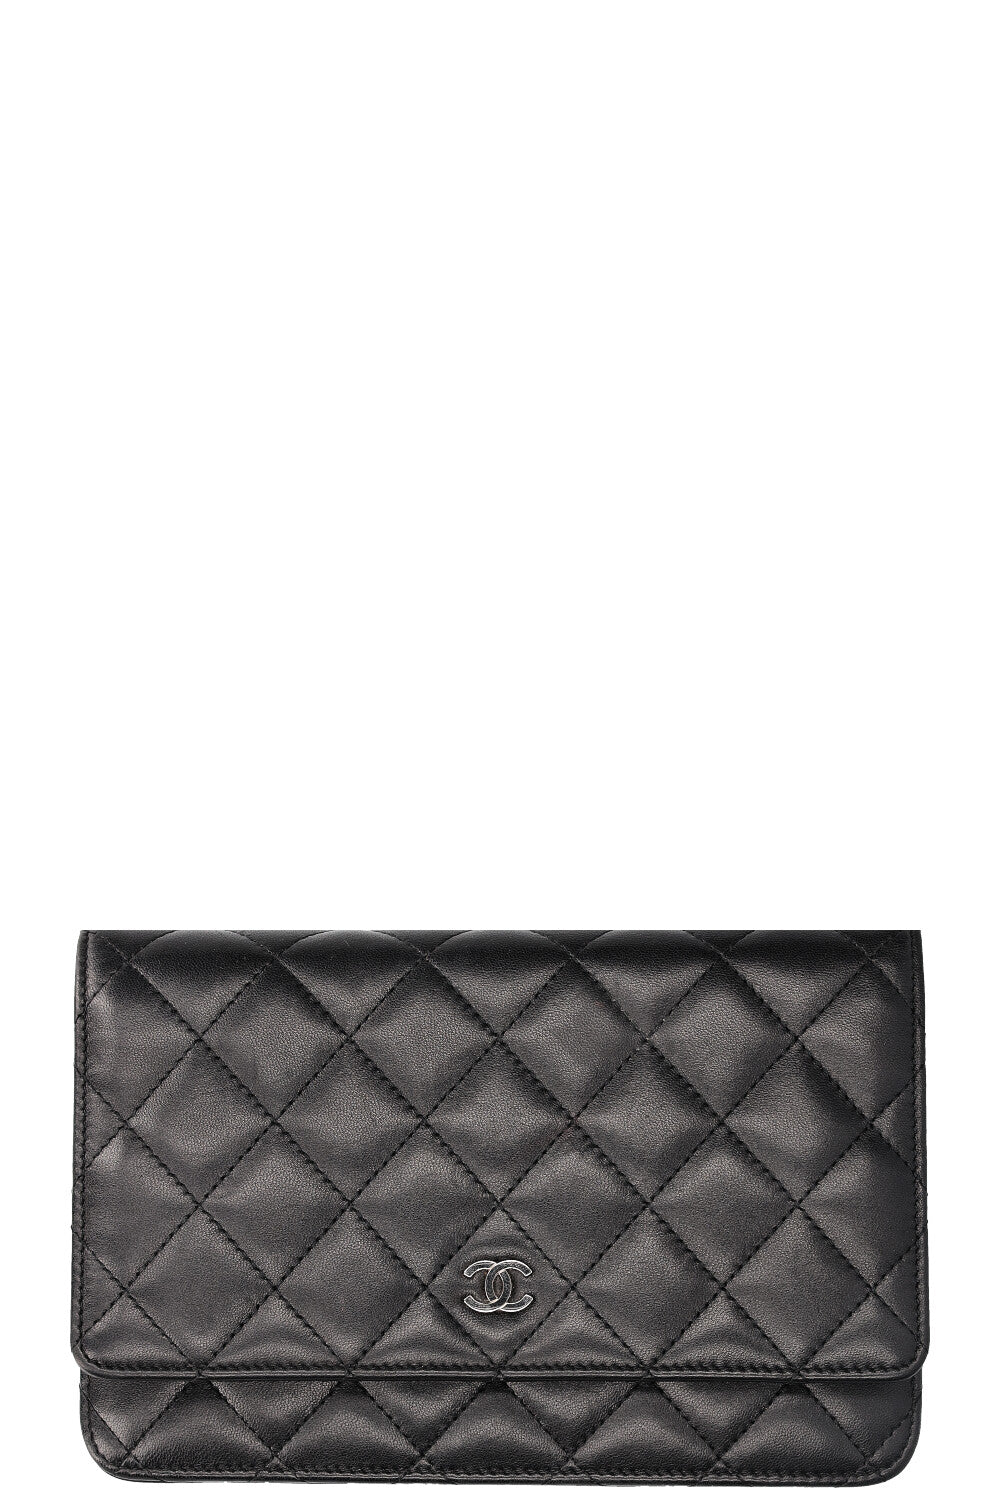 CHANEL WOC Quilted Black